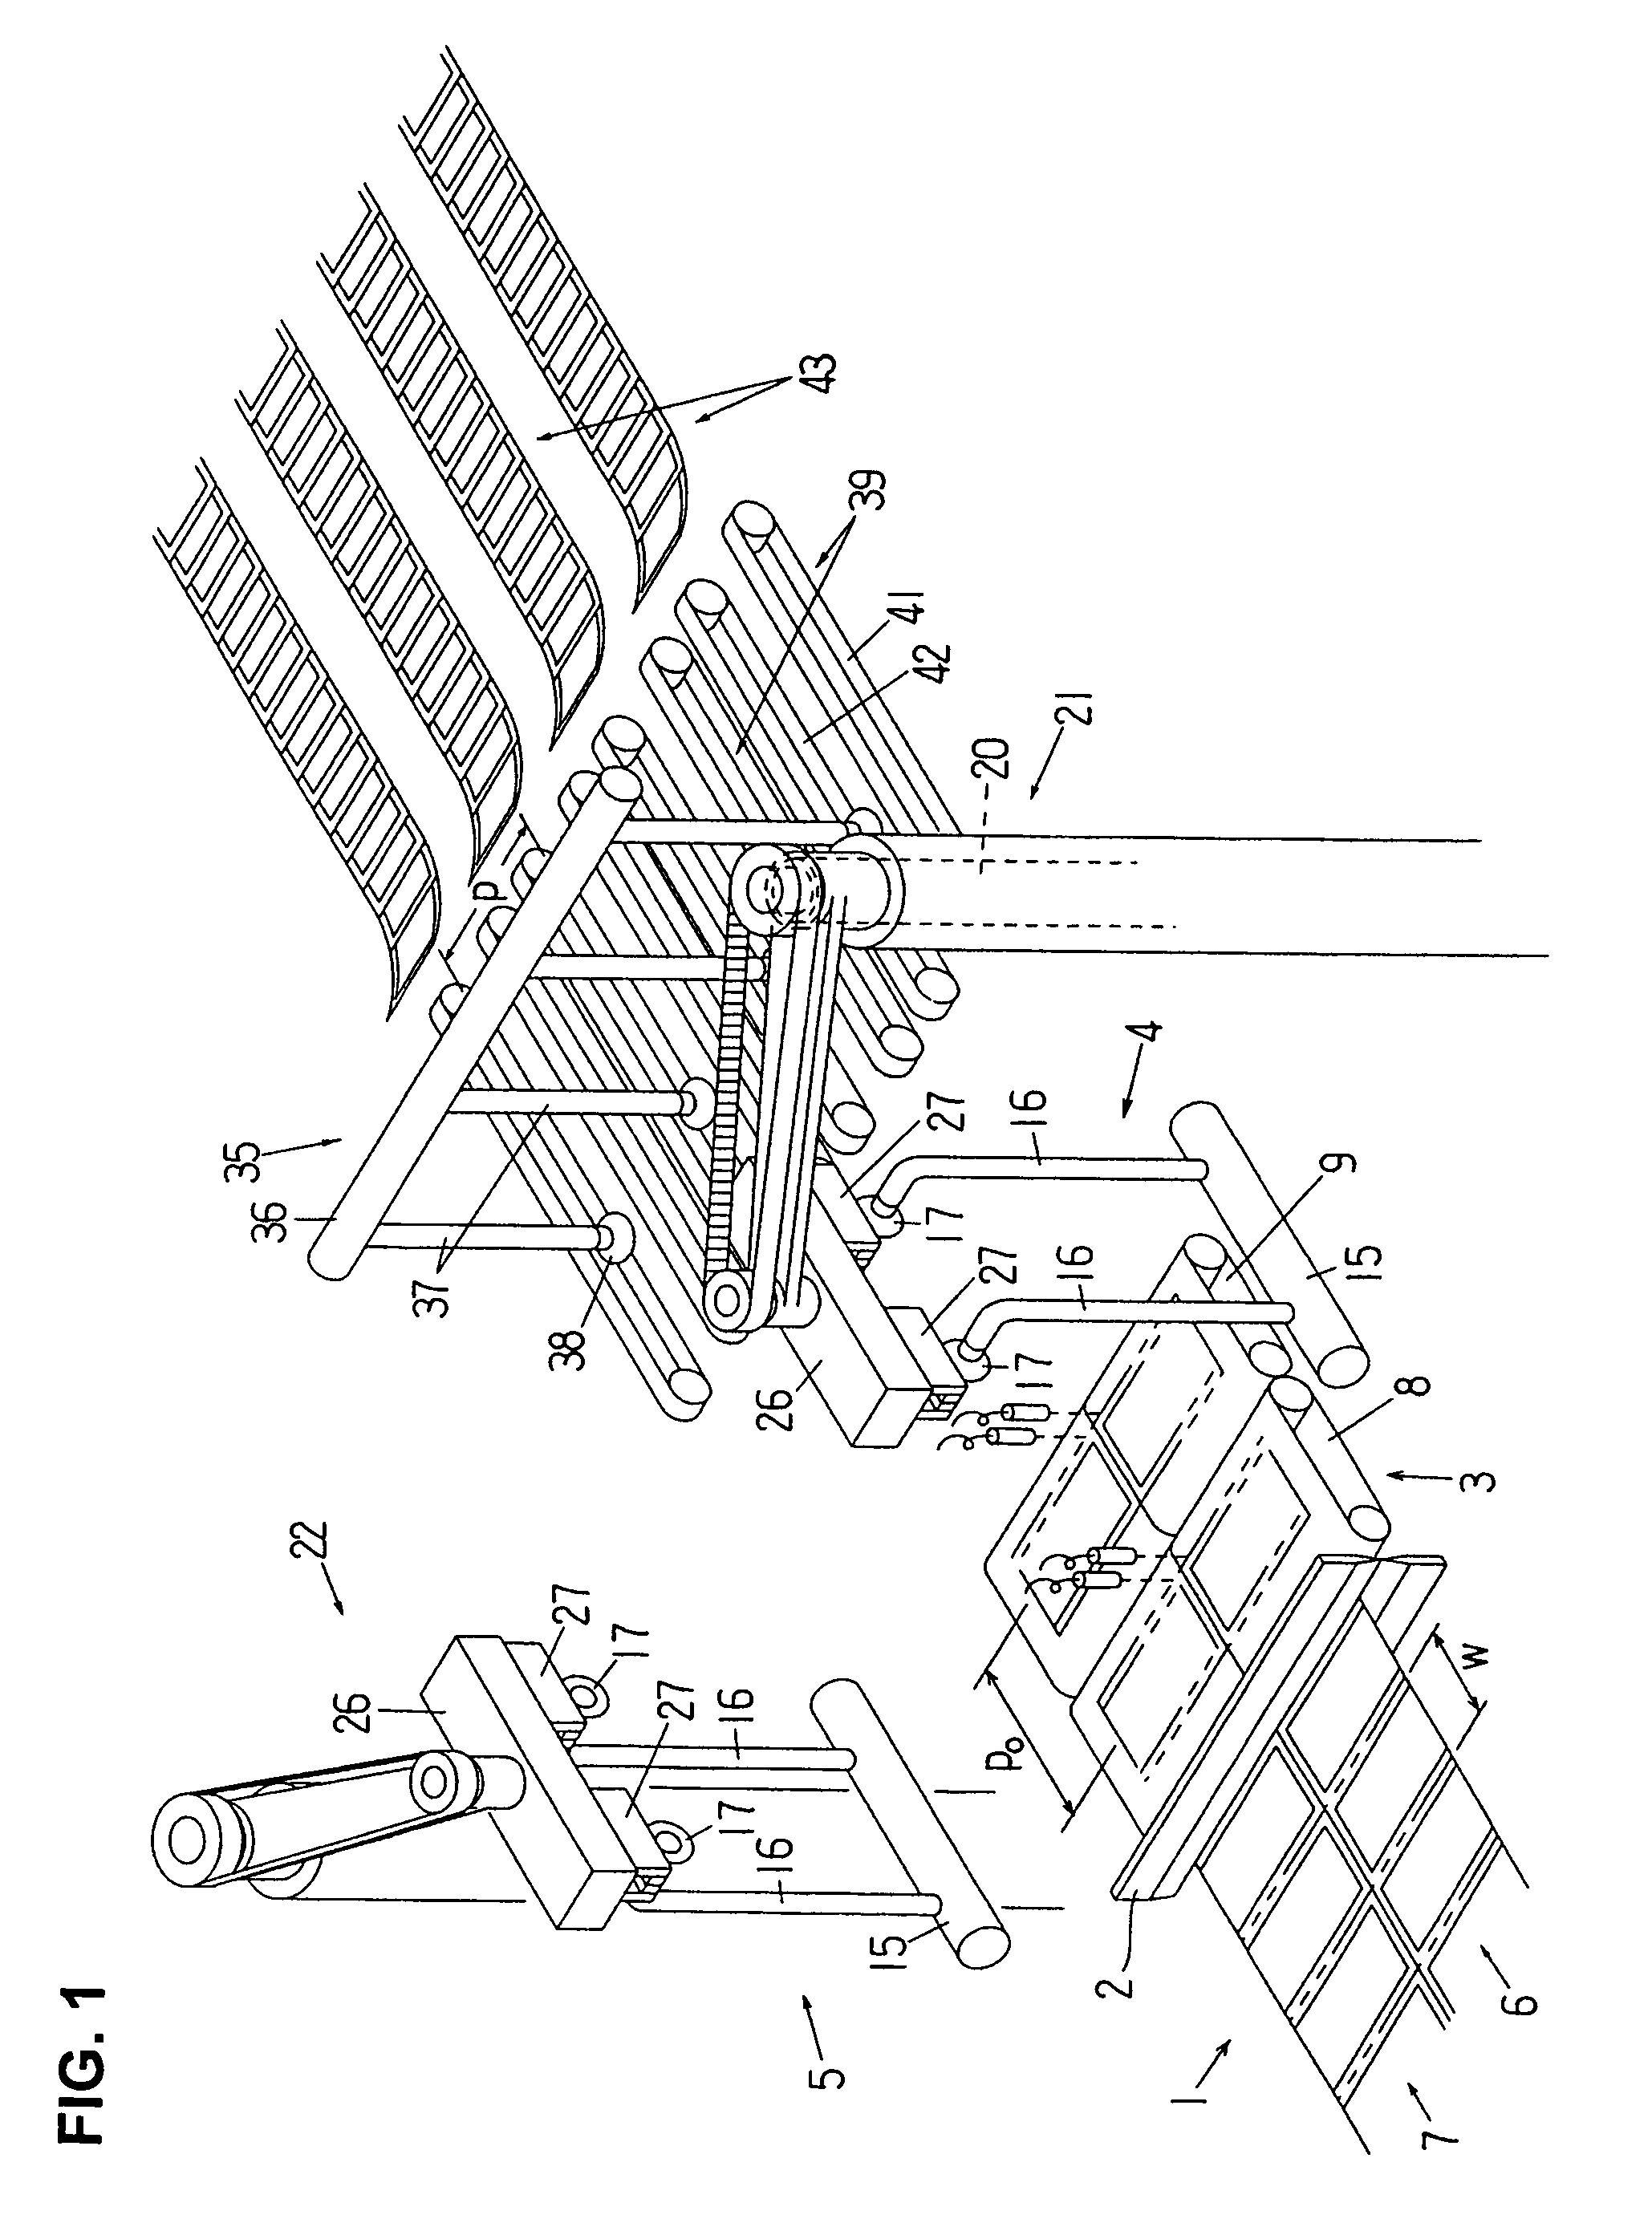 Method and apparatus for supplying bags to a packaging machine